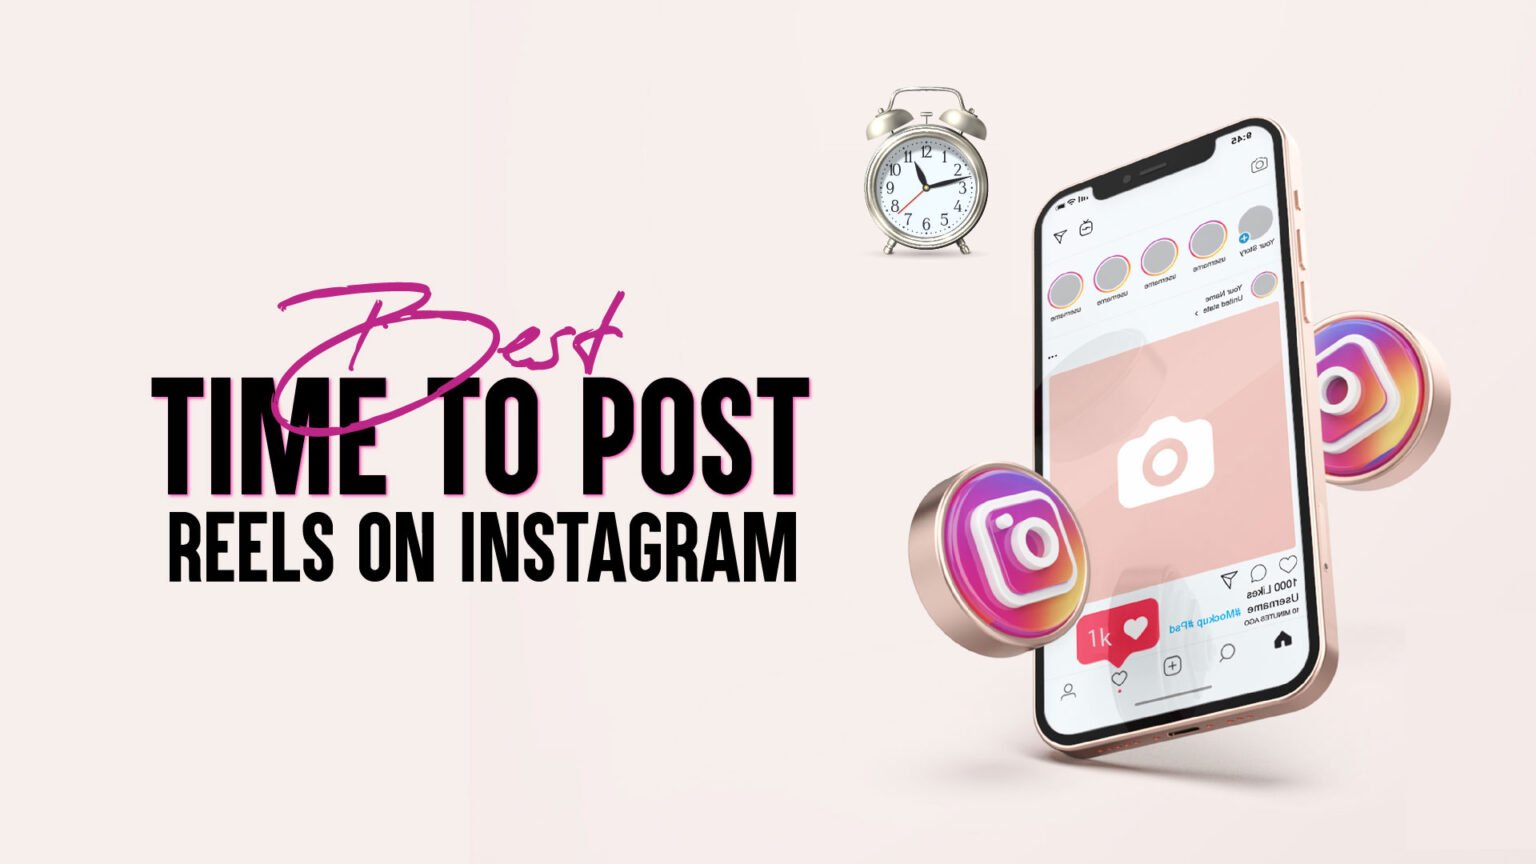 What Is The Best Time To Post Reels On Instagram?